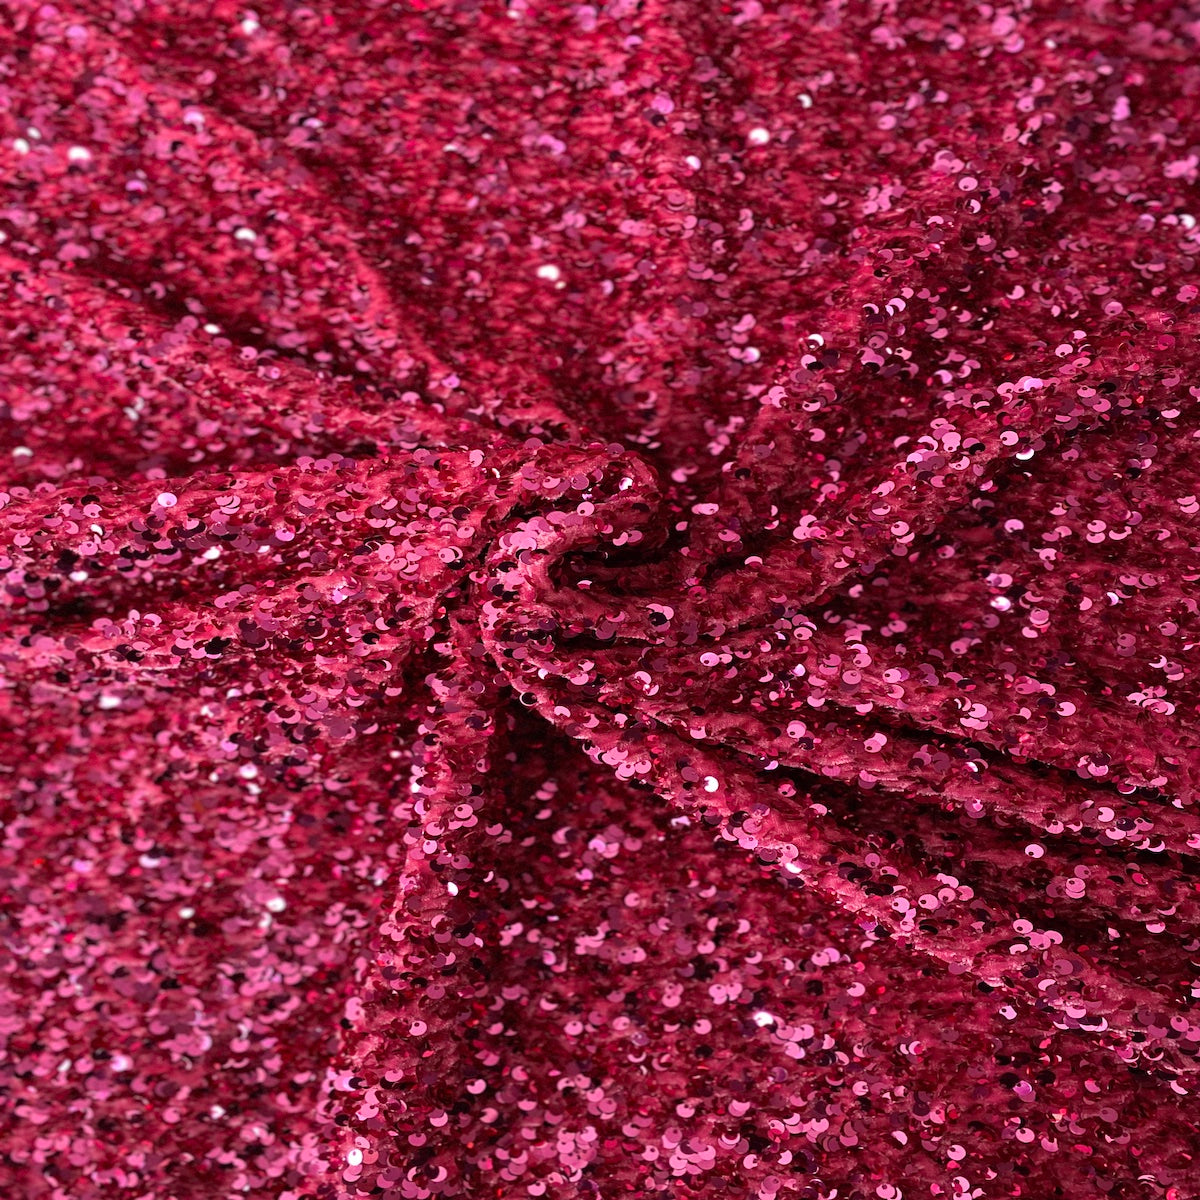 Shiny Pink Sequin Fabric by The Yard 1 Yard Stretch Velvet Fabric for  Sewing Clothing Glitter Pink Sequins Paillette Dress Material Soft  Upholstery